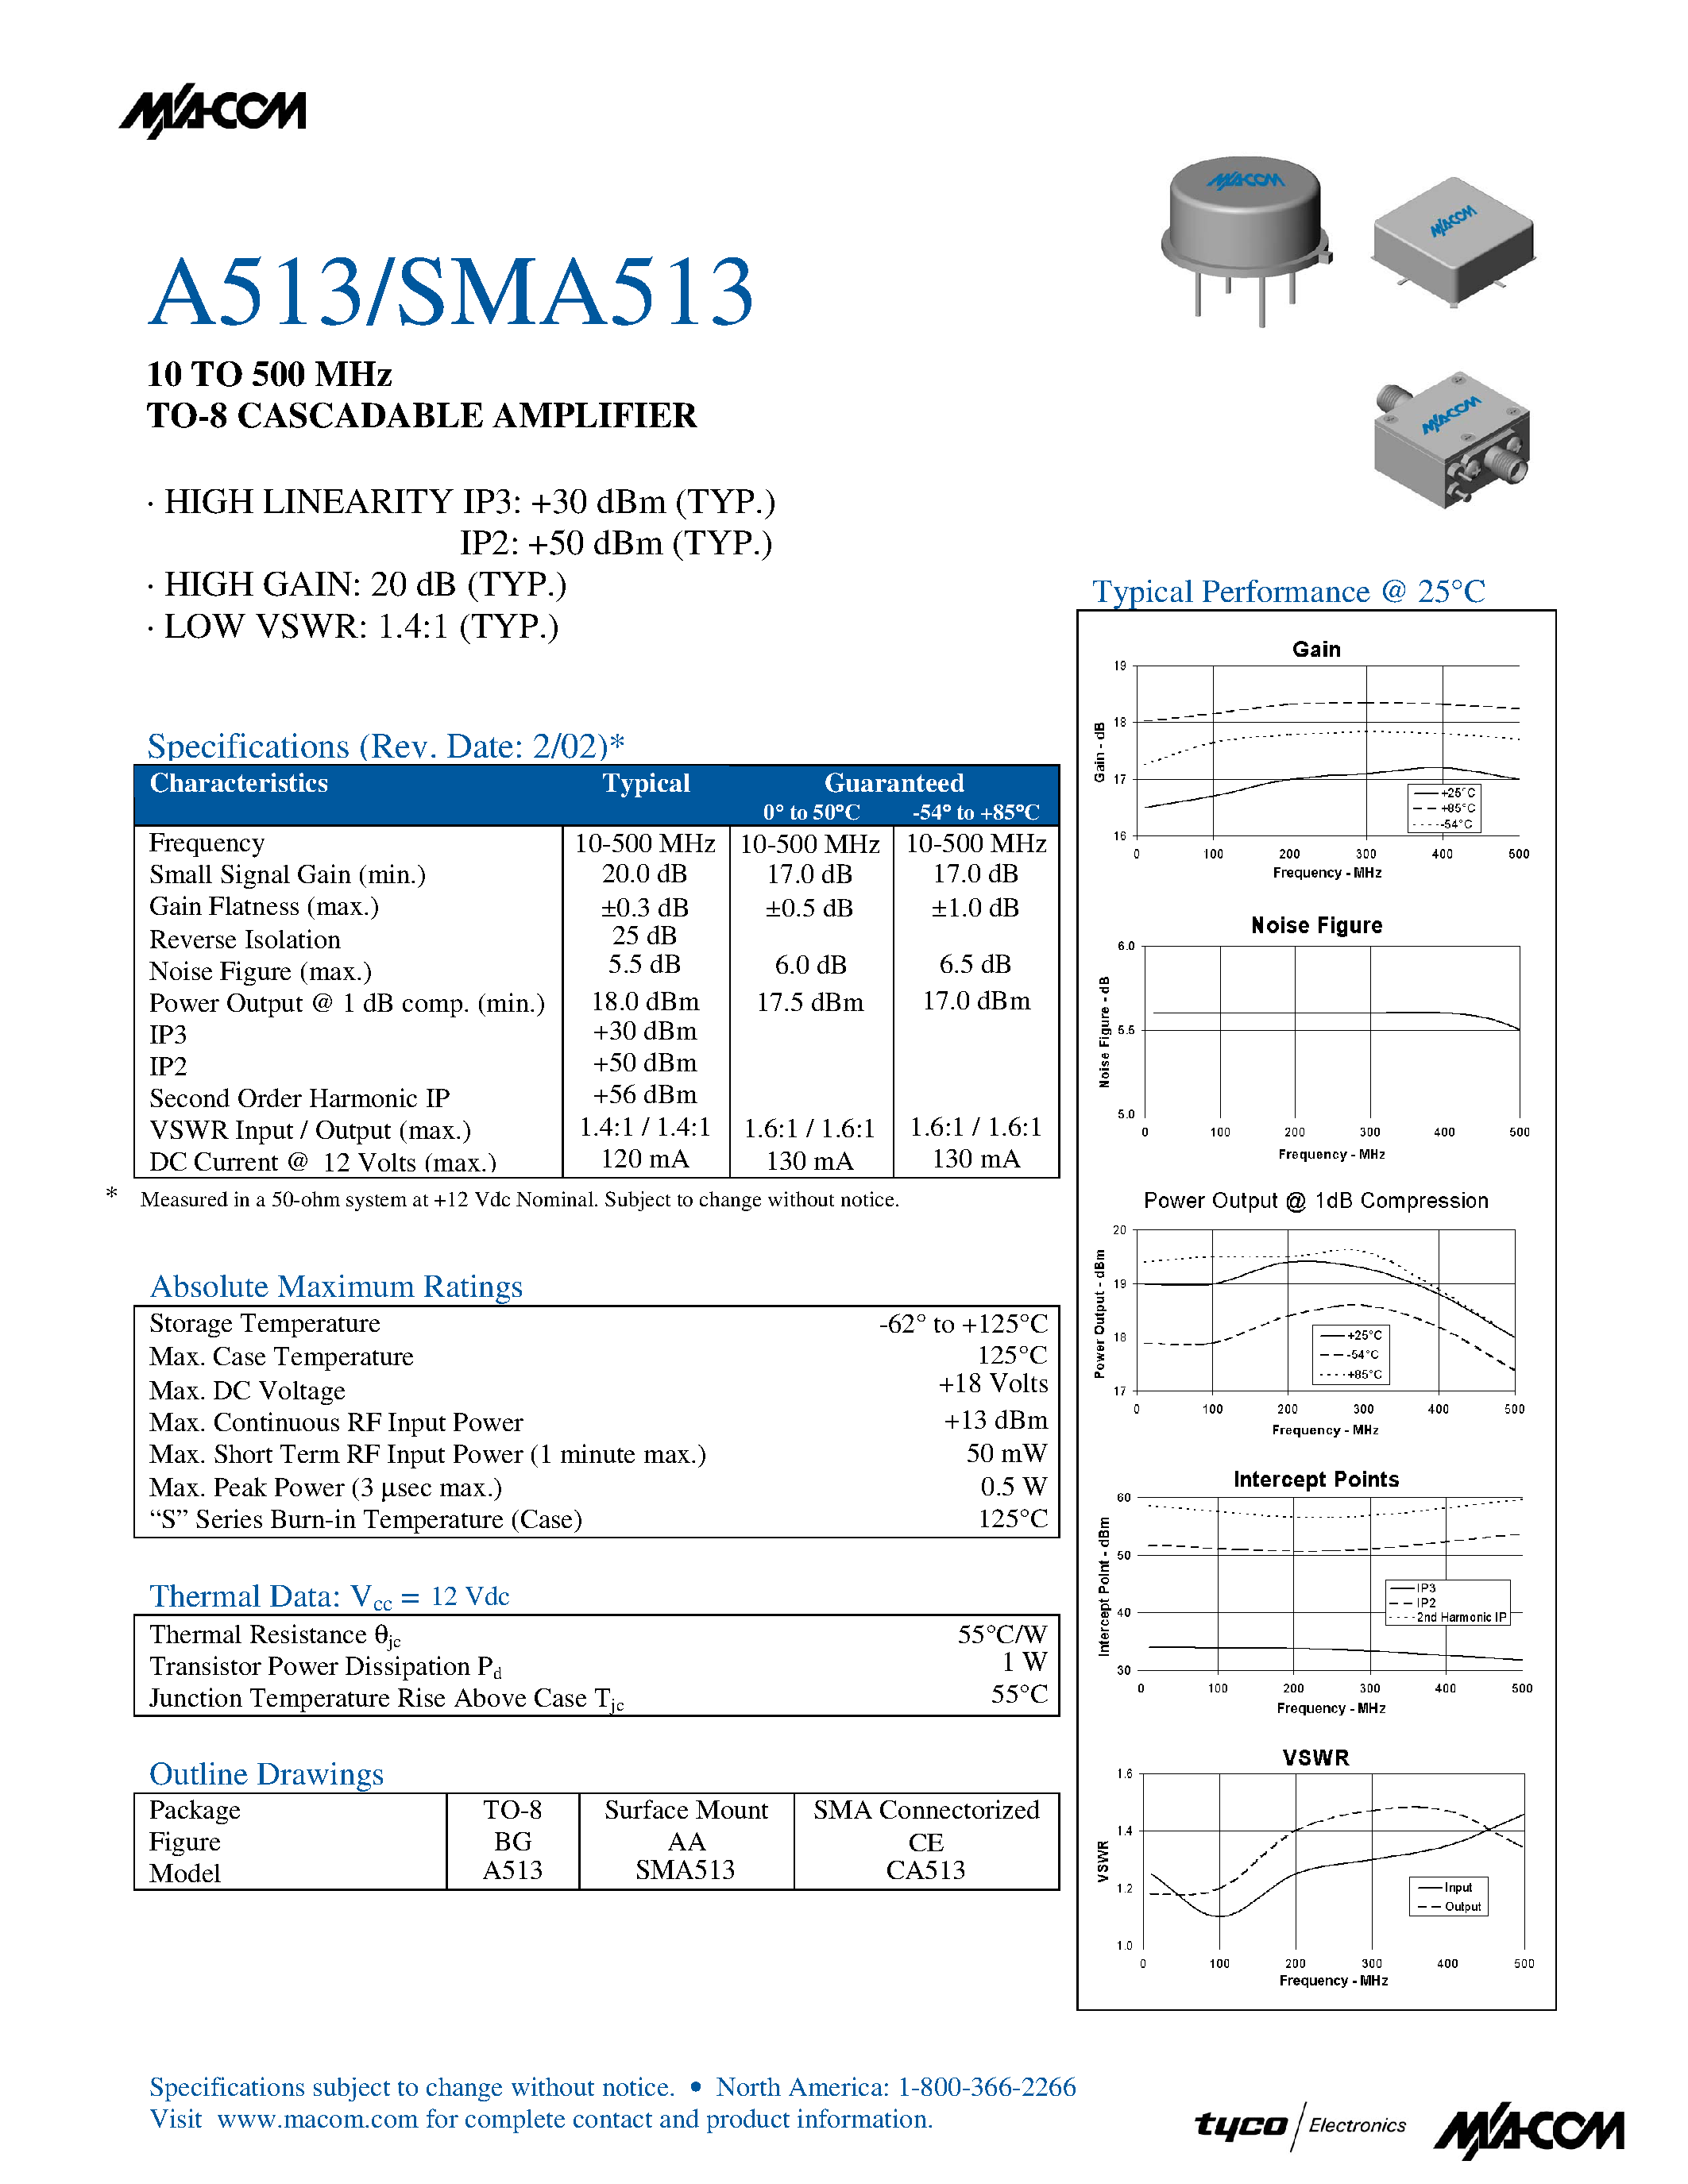 Даташит A513 - 10 TO 500 MHz TO-8 CASCADABLE AMPLIFIER страница 1